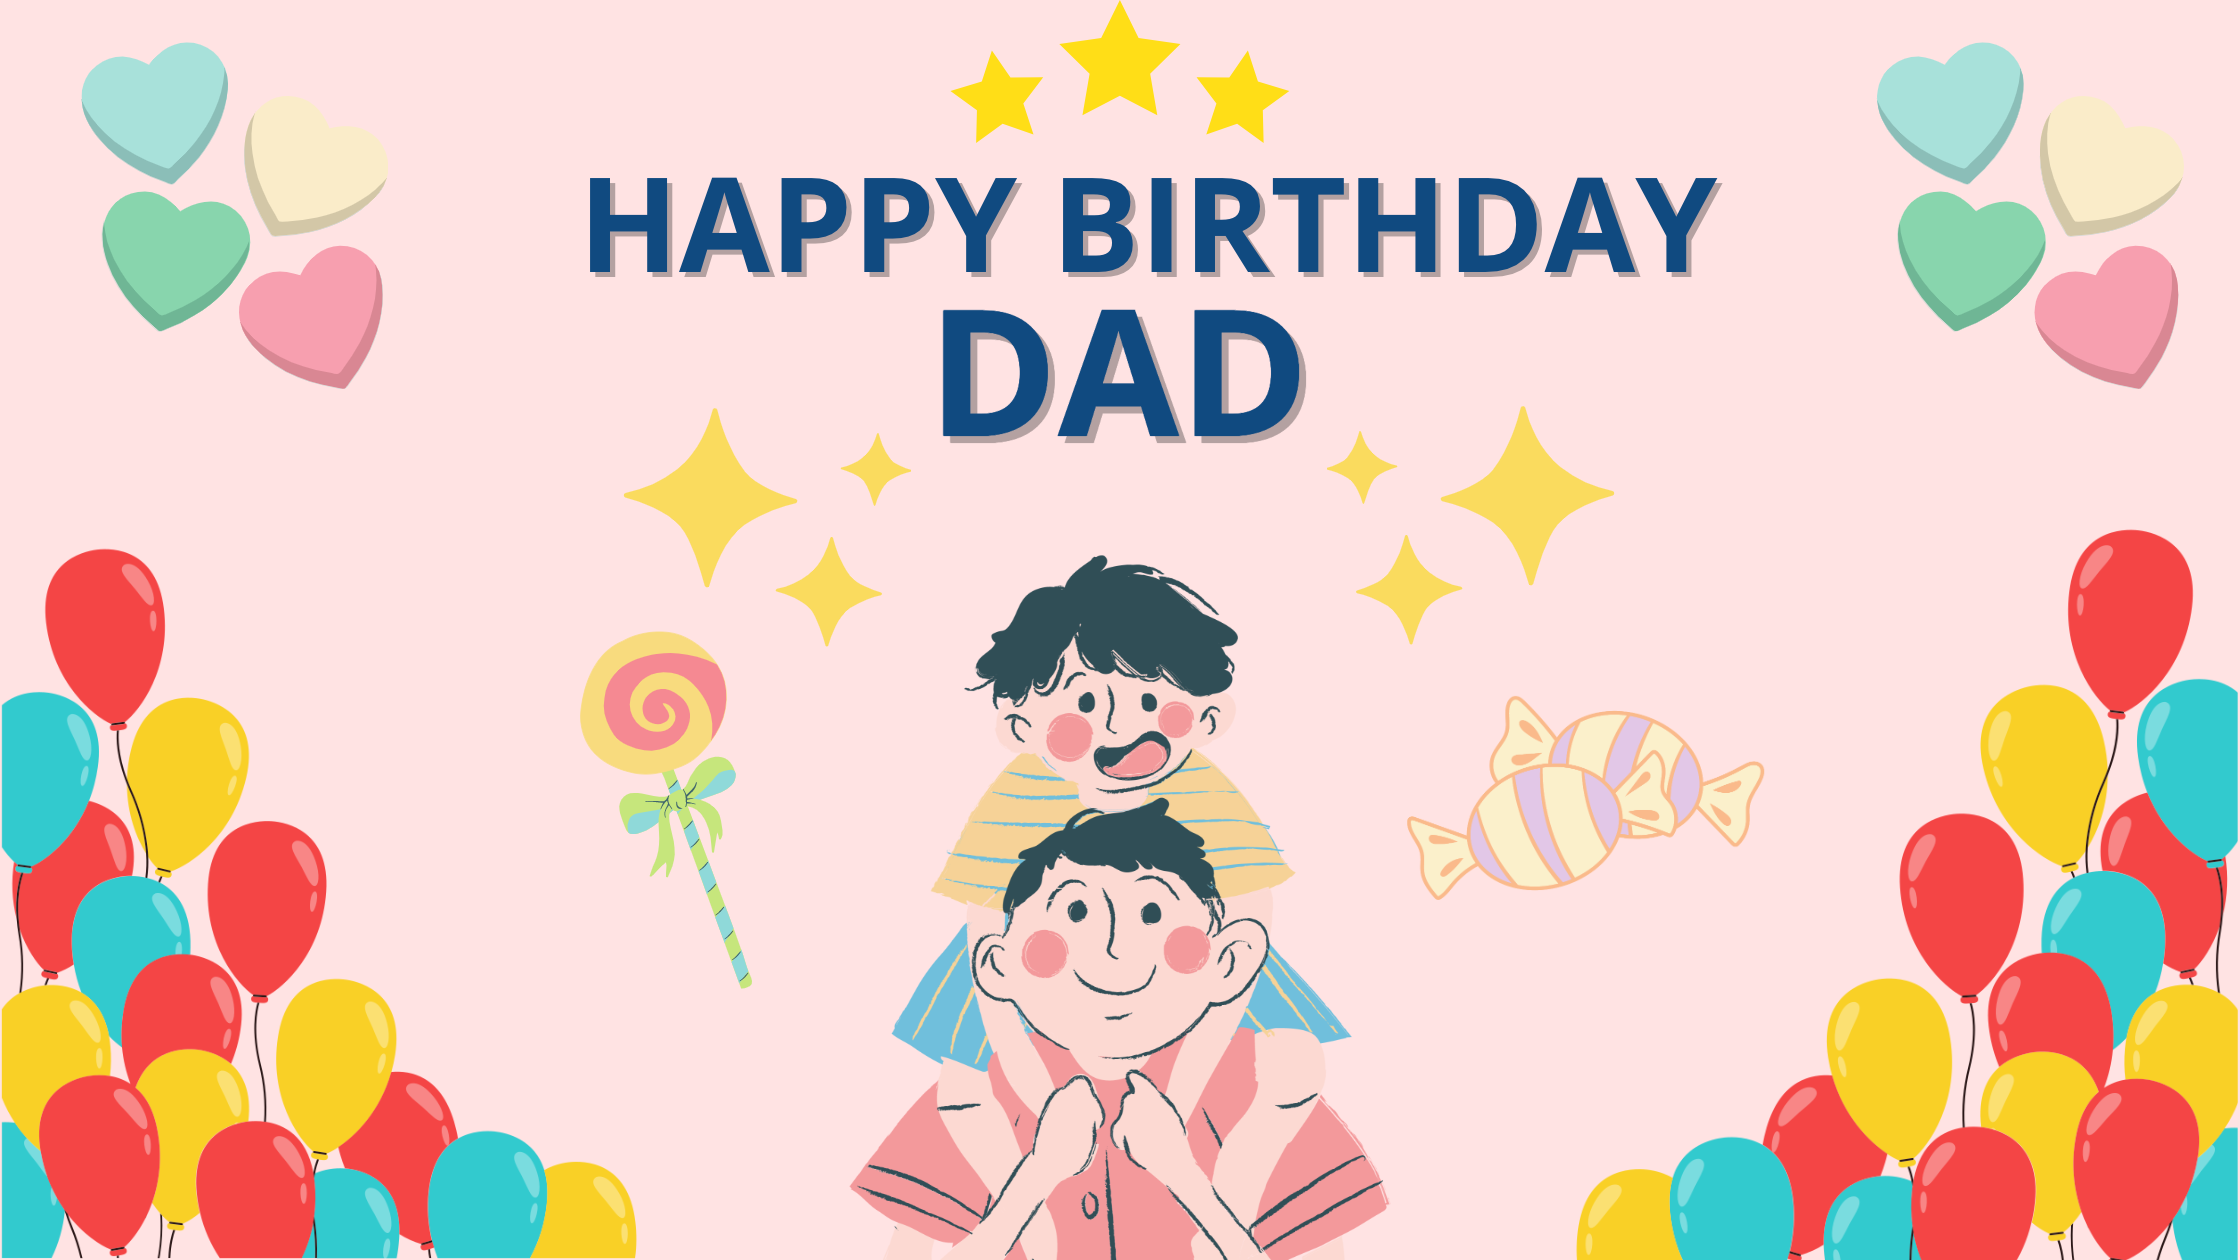 Heart Touching Birthday Wishes for Dad: Your Ultimate Guide to Express Love